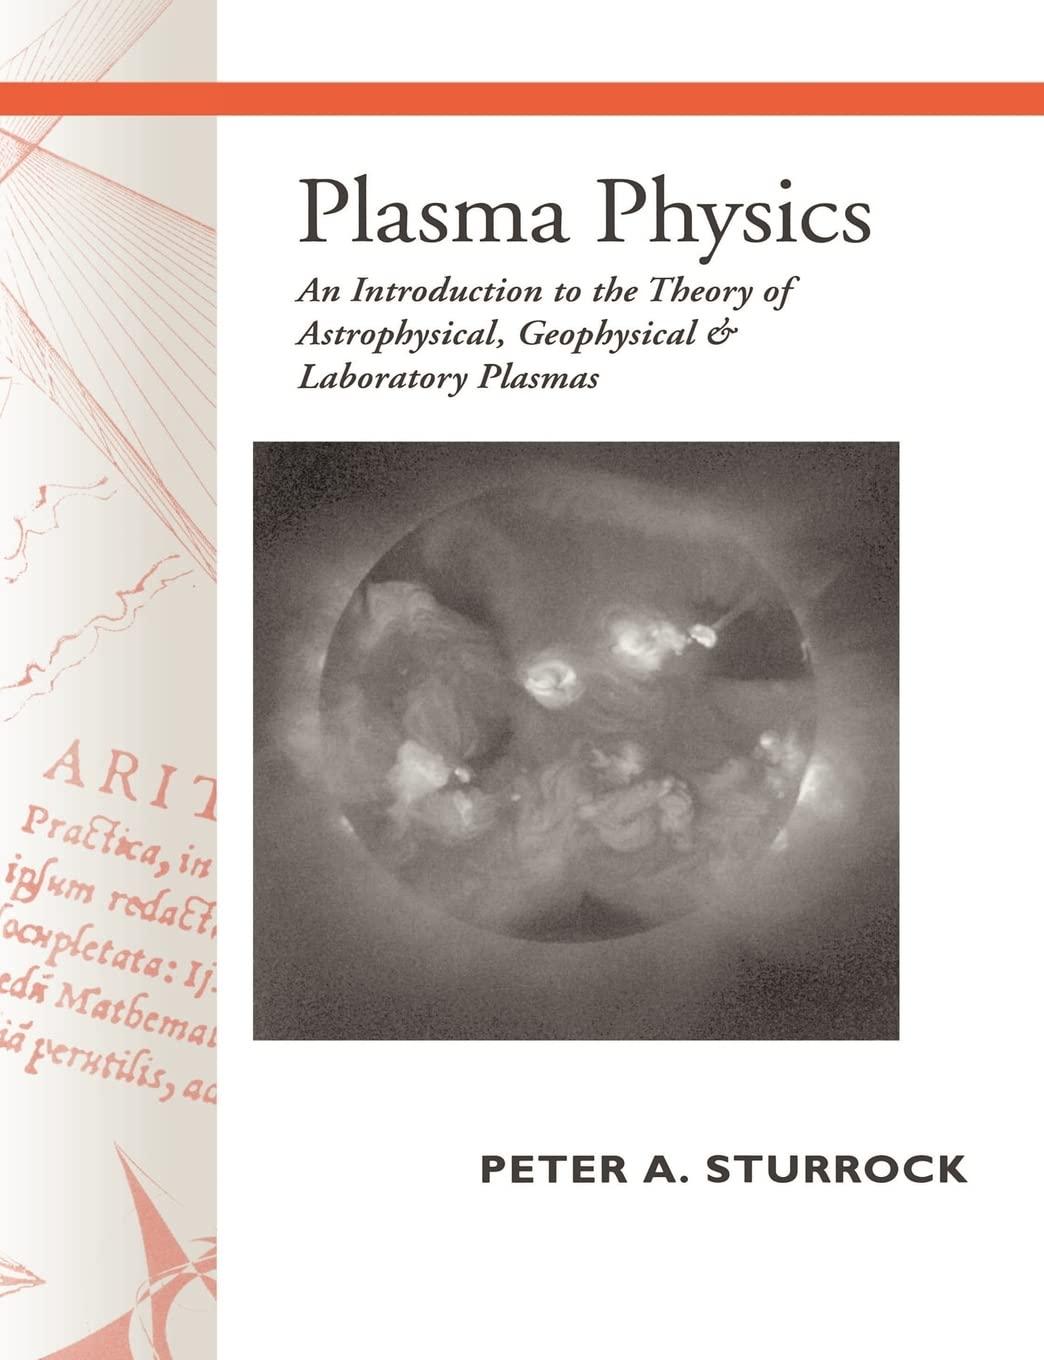 Plasma Physics An Introduction To The Theory Of Astrophysical Geophysical And Laboratory Plasmas